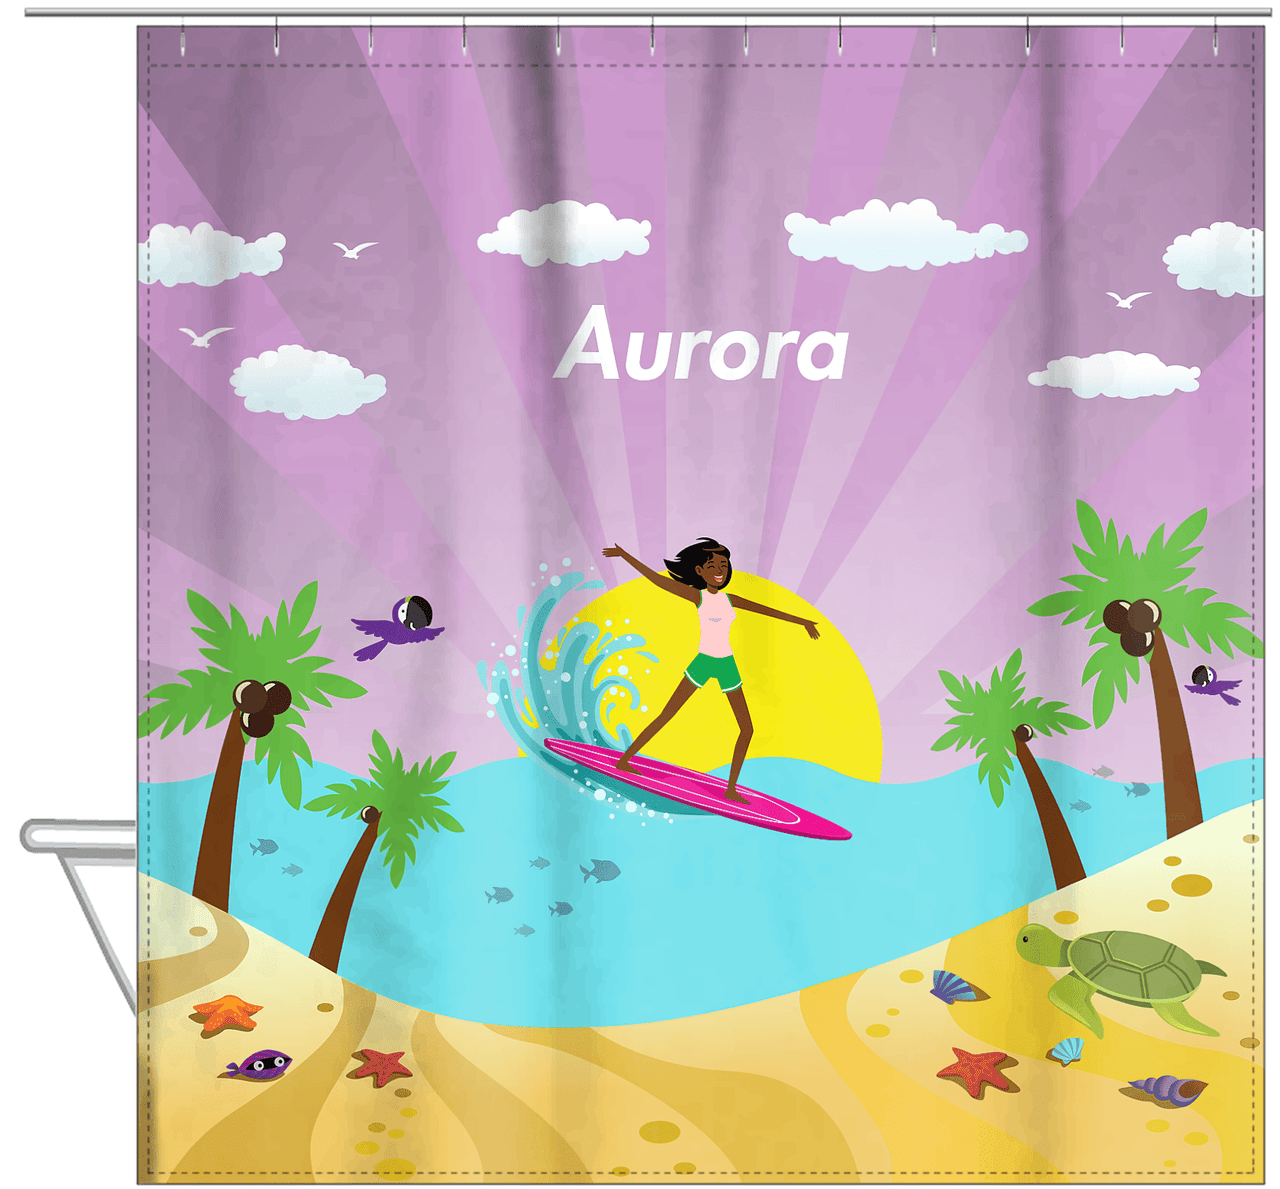 Personalized Surfing Shower Curtain II - Black Girl I - Hanging View